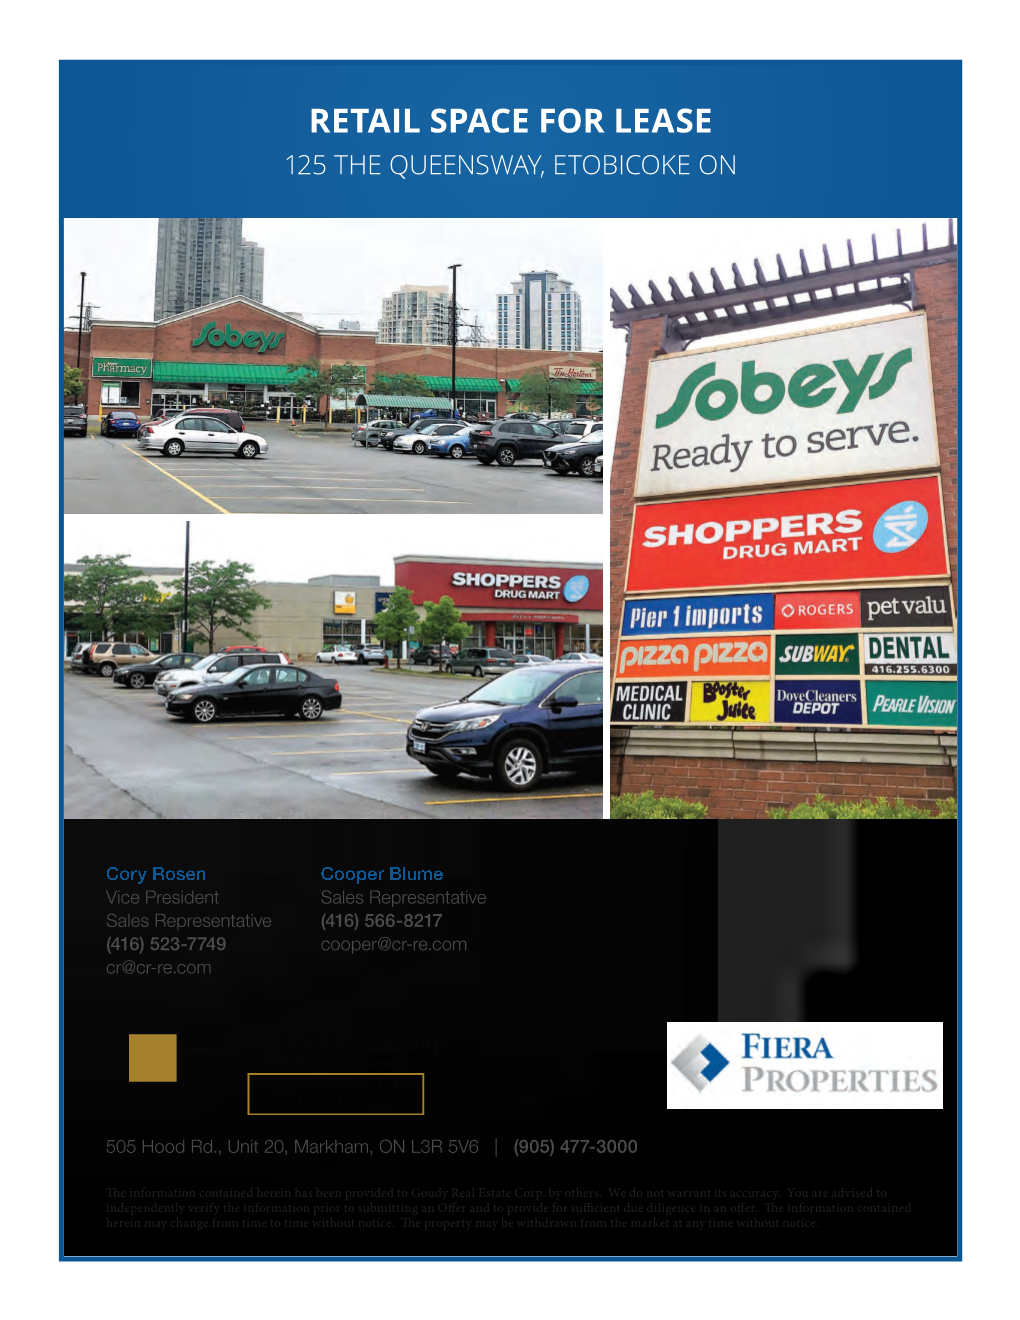 Retail Space for Lease 125 the Queensway, Etobicoke On